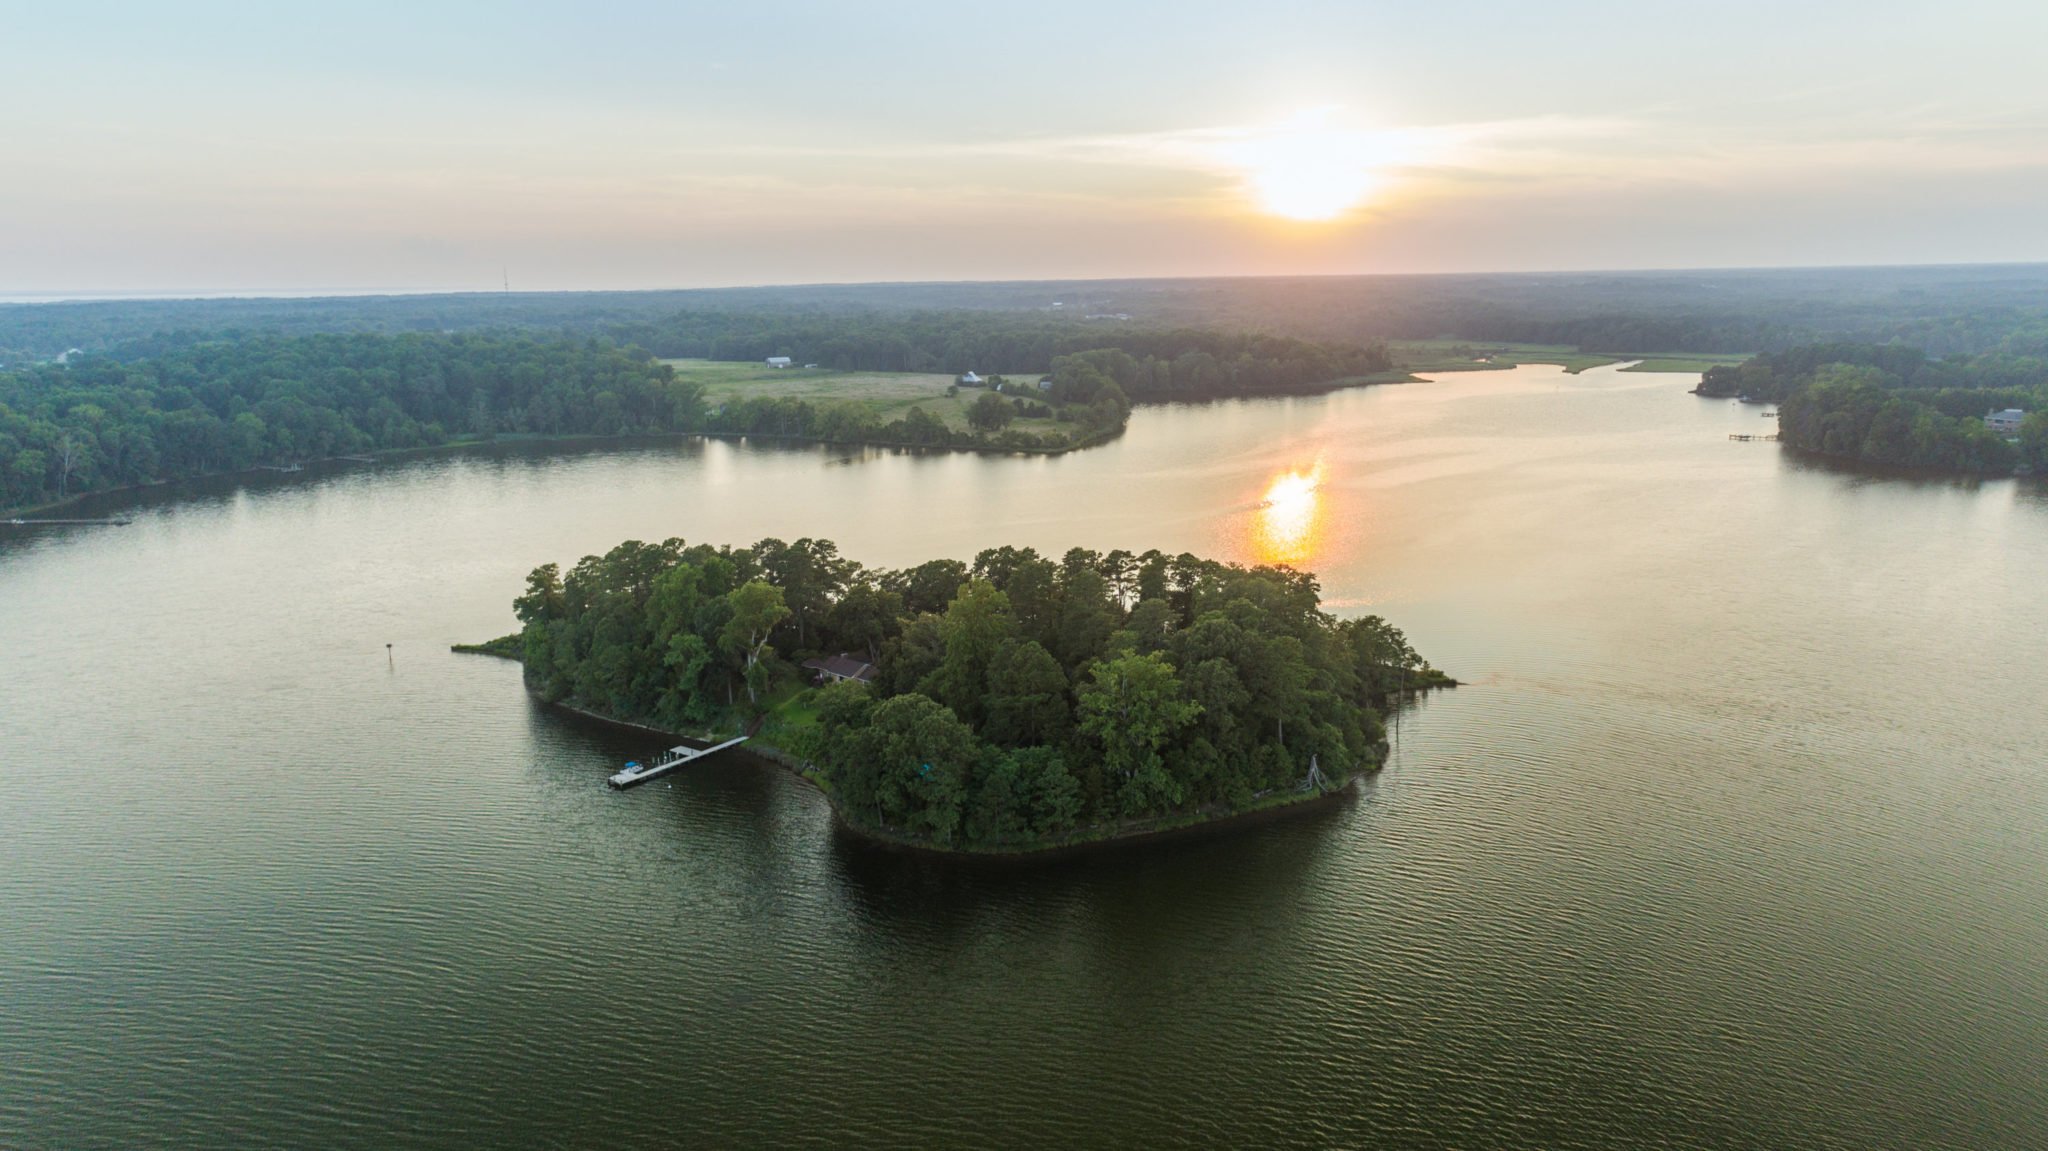 This Private Island For Sale Off the Chesapeake Comes With a Fascinating Past